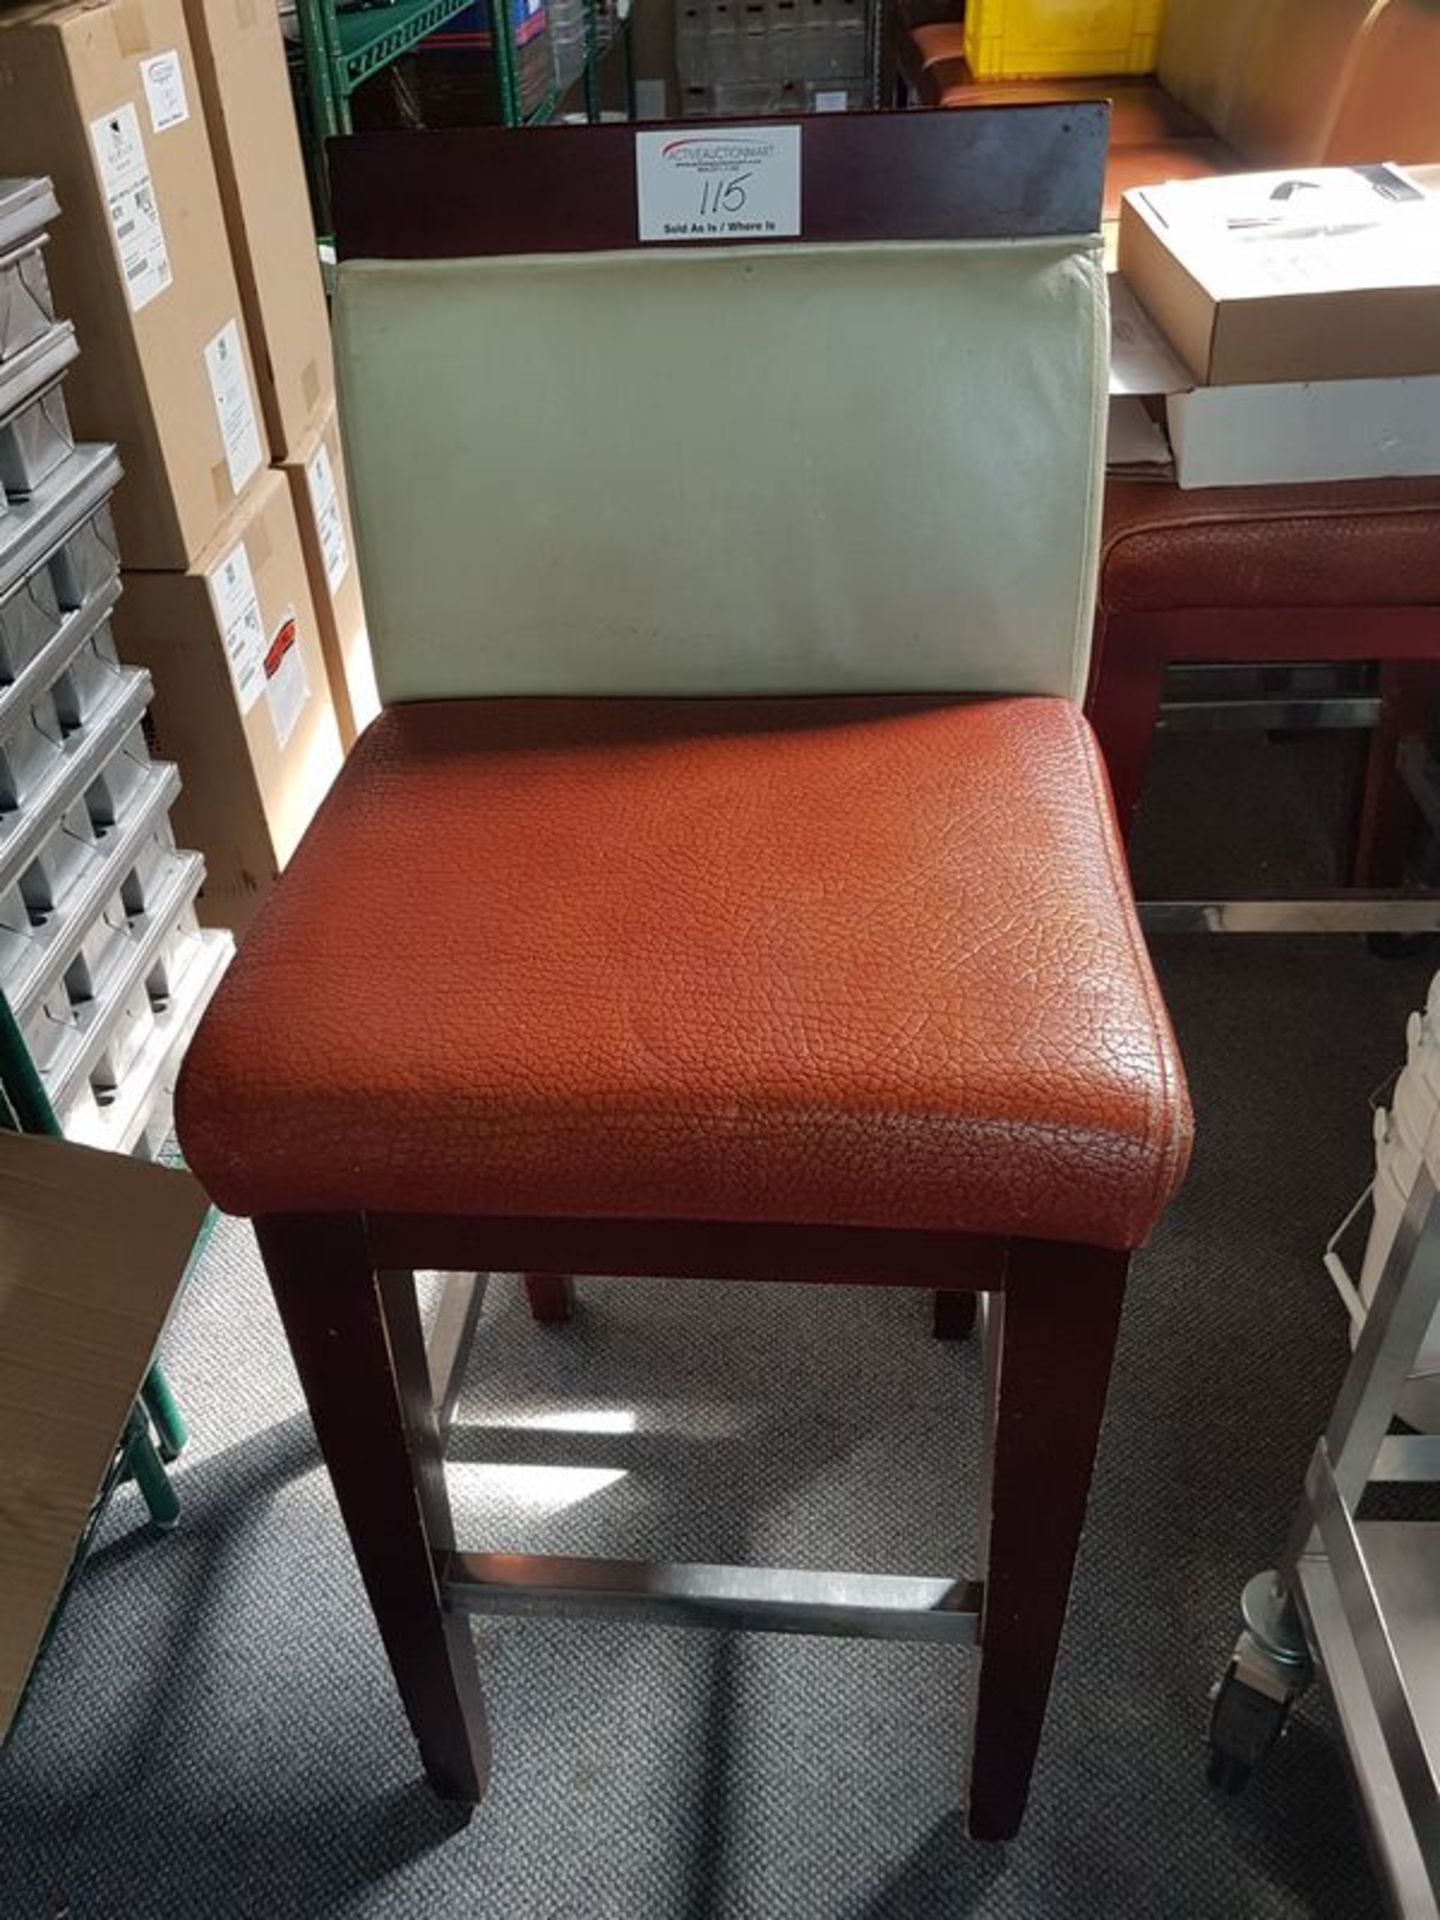 8 Leather Swivel Bar Stools - Equals Price Each times 8